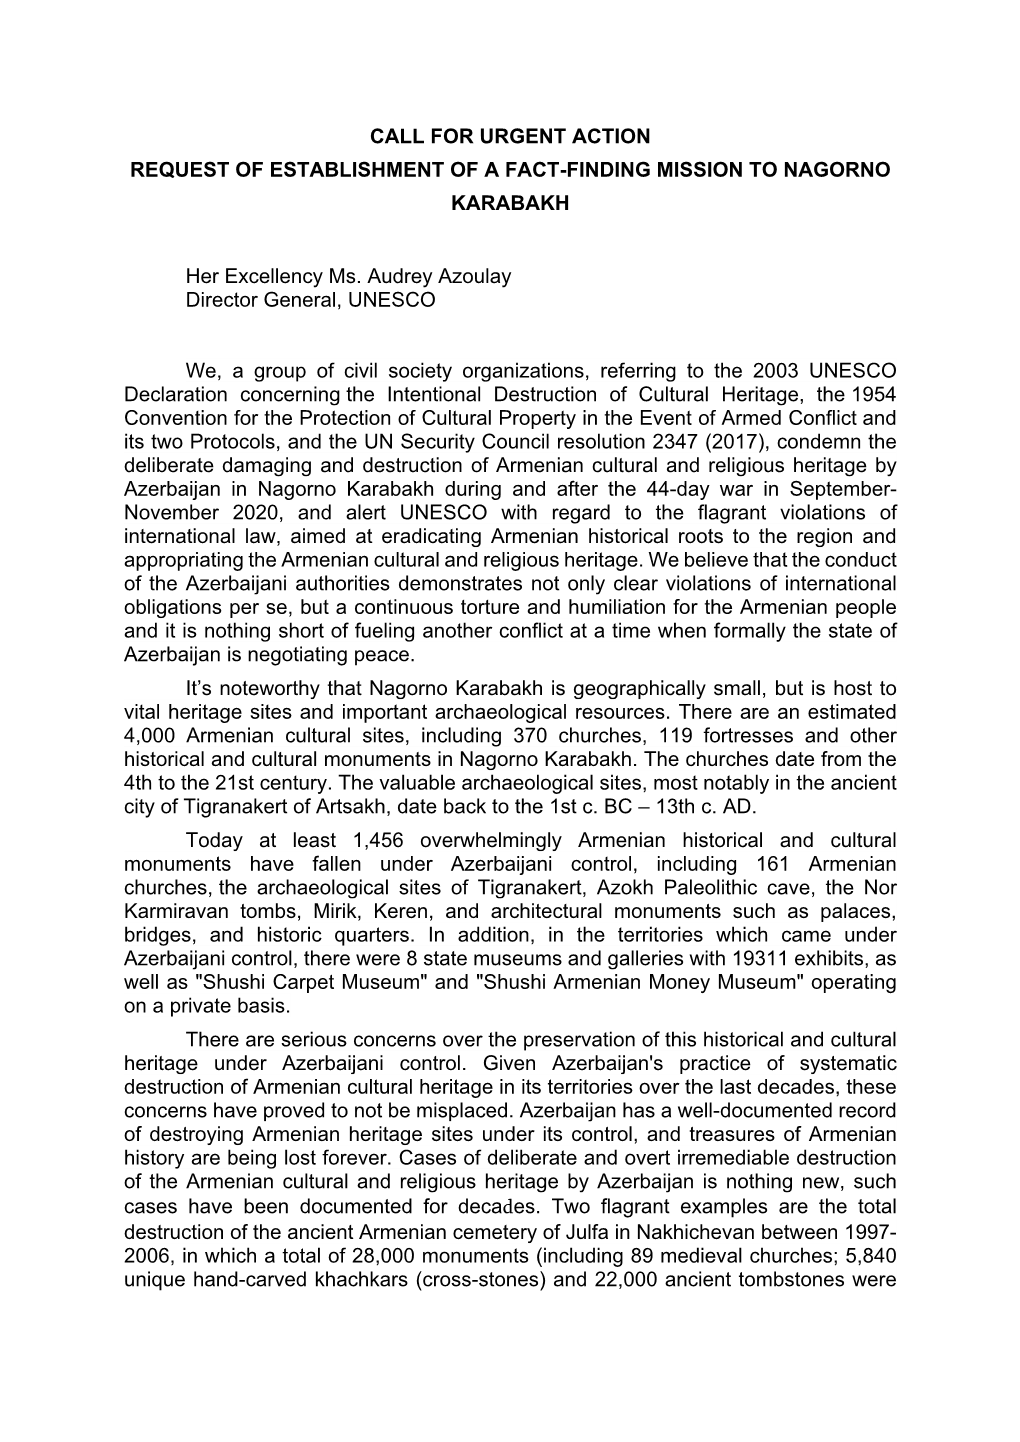 CALL for URGENT ACTION REQUEST of ESTABLISHMENT of a FACT-FINDING MISSION to NAGORNO KARABAKH Her Excellency Ms. Audrey Azoulay